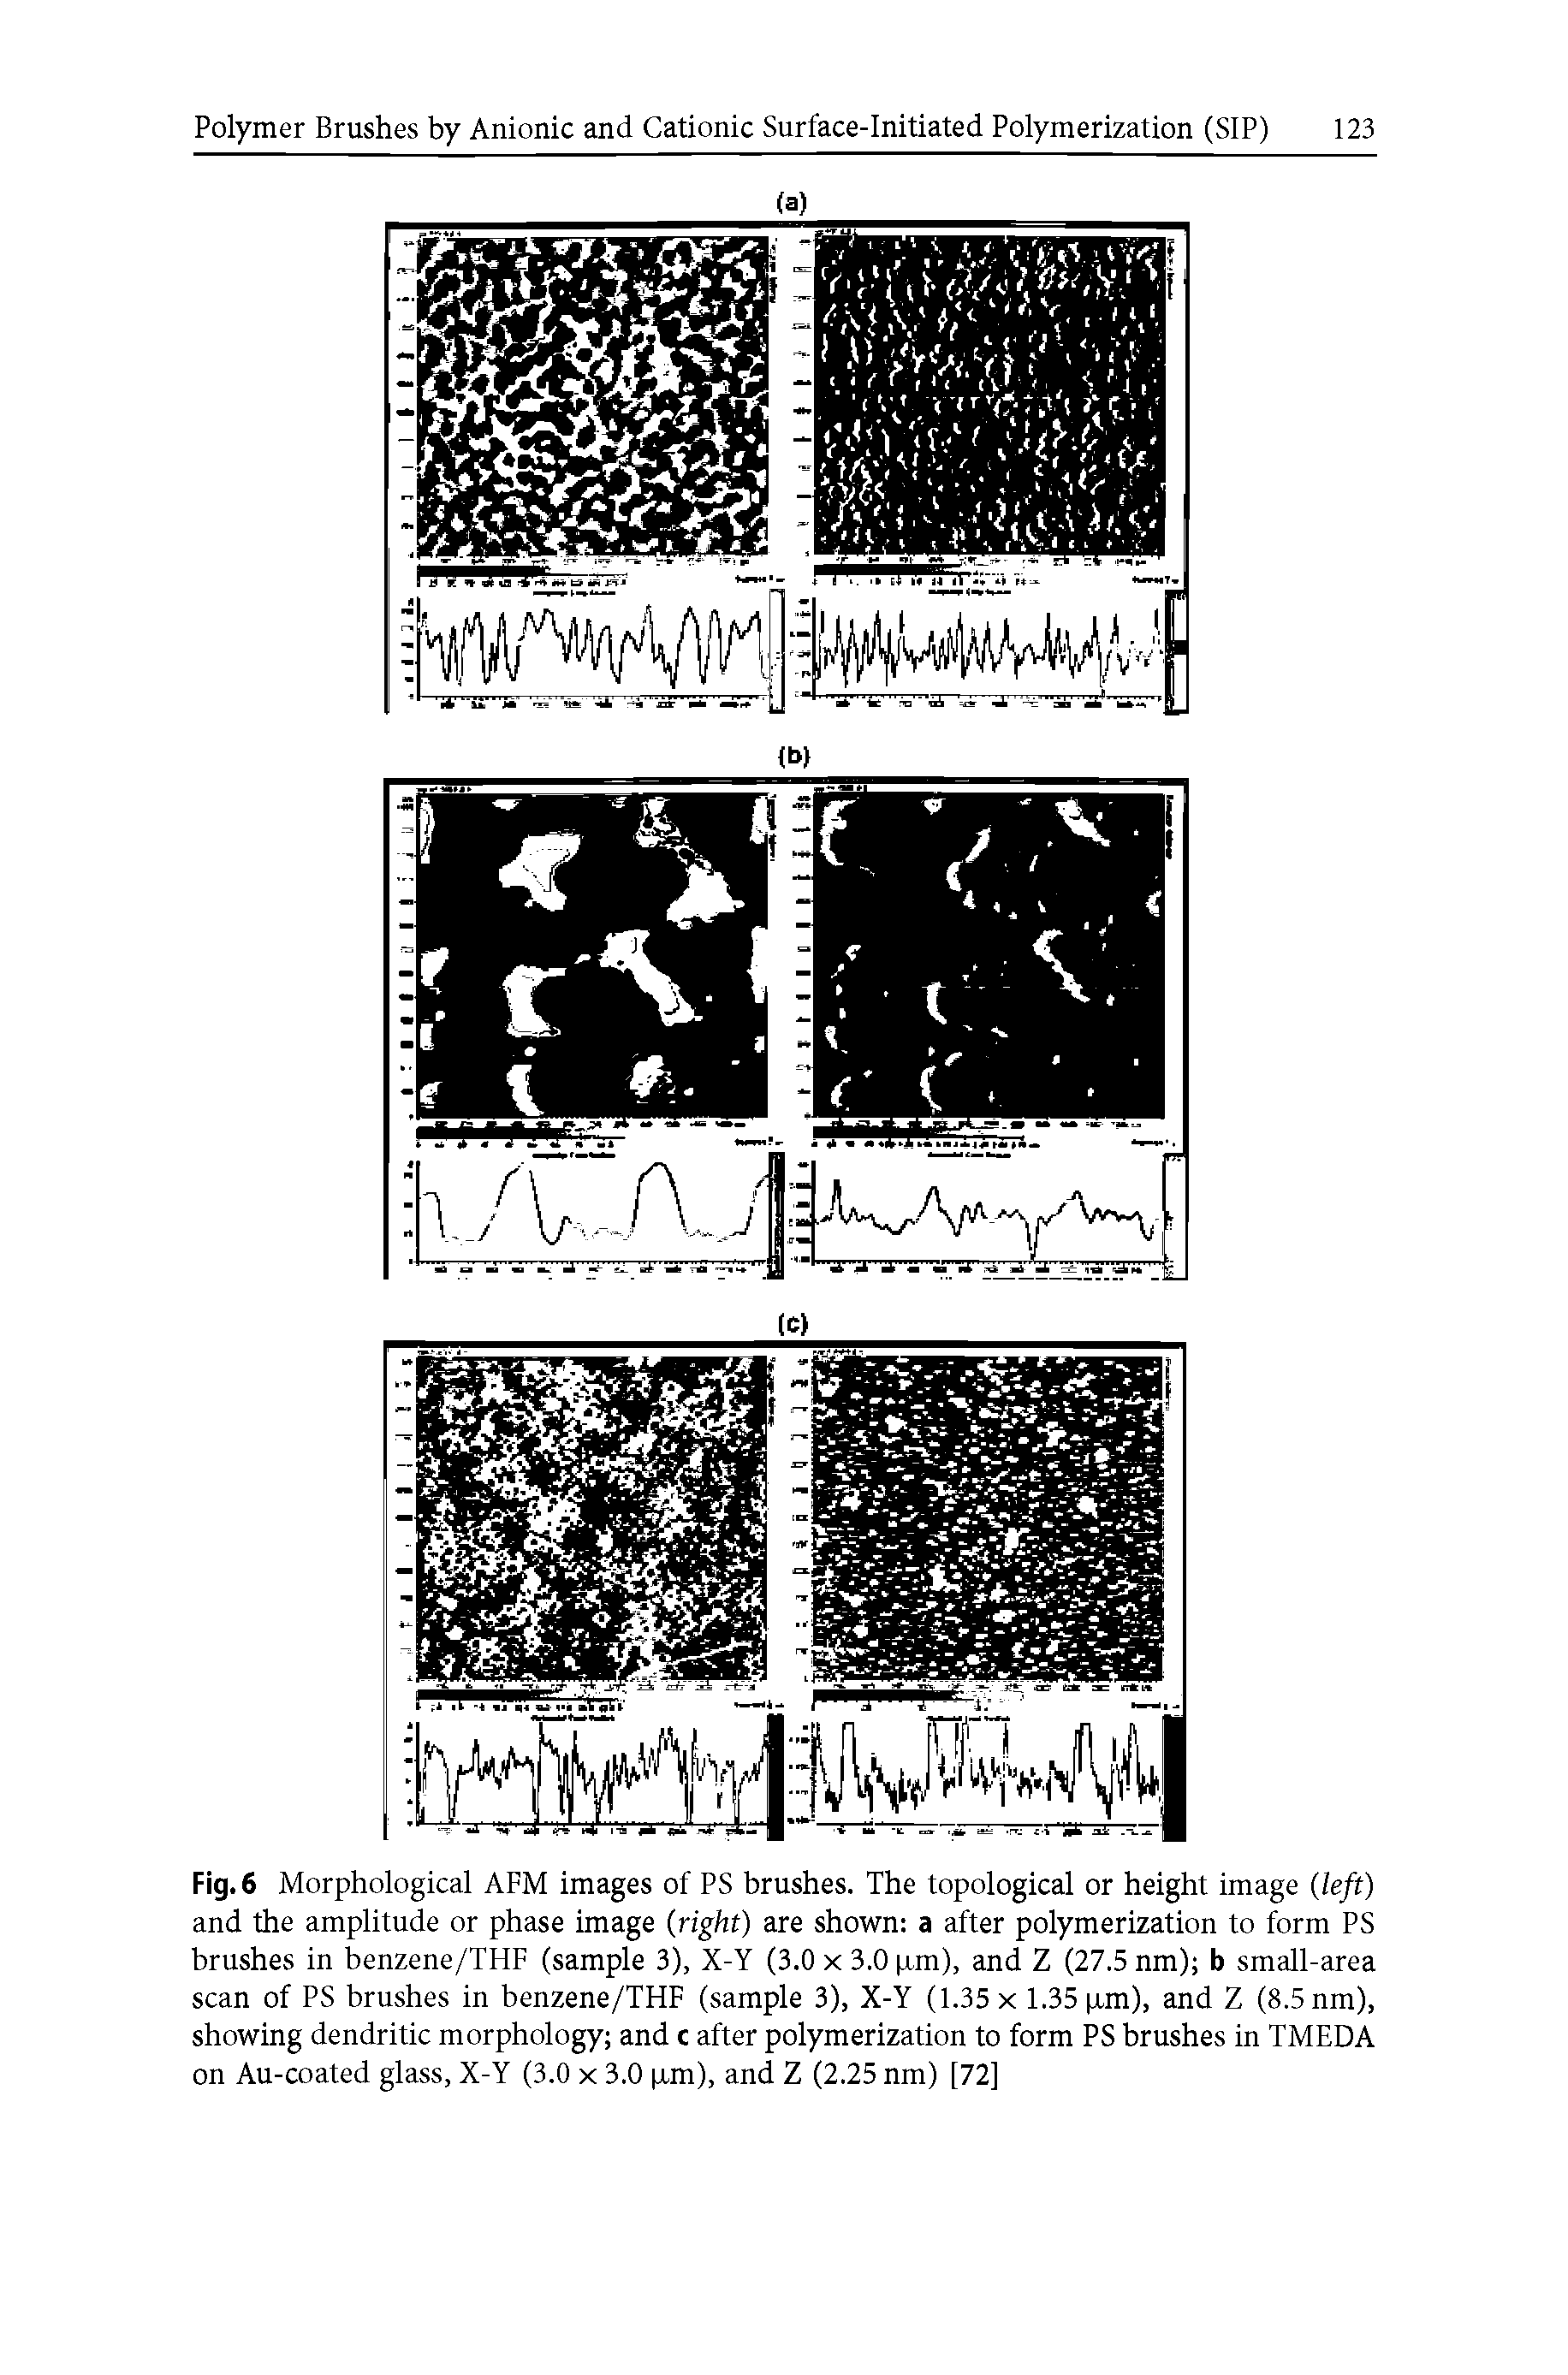 Fig. 6 Morphological AFM images of PS brushes. The topological or height image (left) and the amplitude or phase image (right) are shown a after polymerization to form PS brushes in benzene/THF (sample 3), X-Y (3.0 x 3.0 p.m), and Z (27.5 nm) b small-area scan of PS brushes in benzene/THF (sample 3), X-Y (1.35 x 1.35 p.m), and Z (8.5 nm), showing dendritic morphology and c after polymerization to form PS brushes in TMEDA on Au-coated glass, X-Y (3.0 x 3.0 p.m), and Z (2.25 nm) [72]...